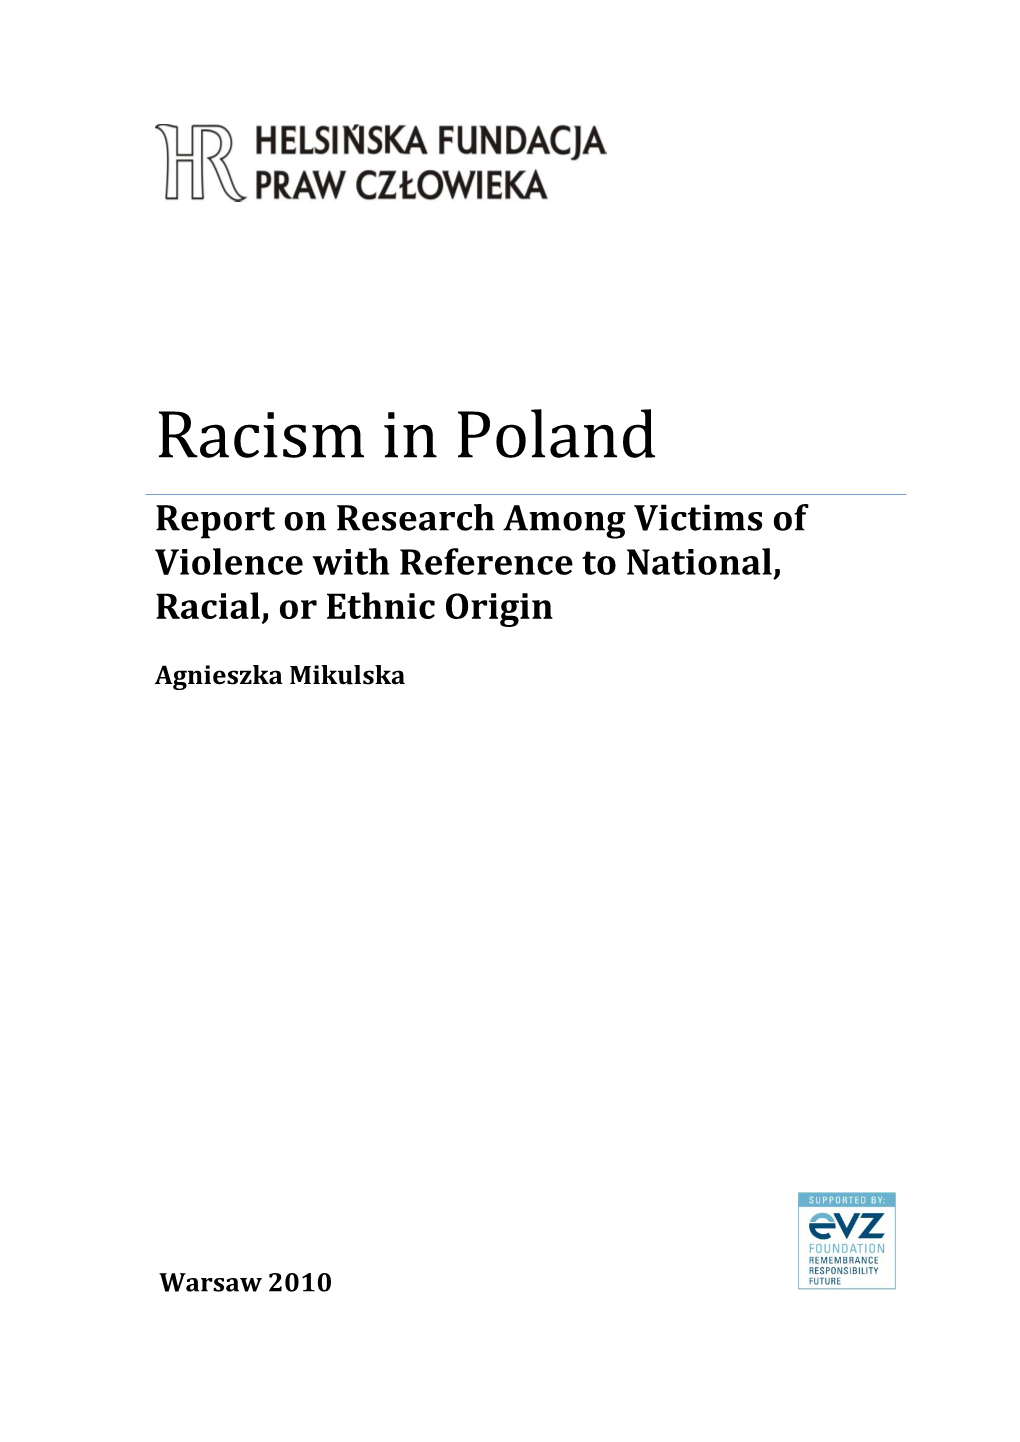 Racism in Poland Report on Research Among Victims of Violence with Reference to National, Racial, Or Ethnic Origin